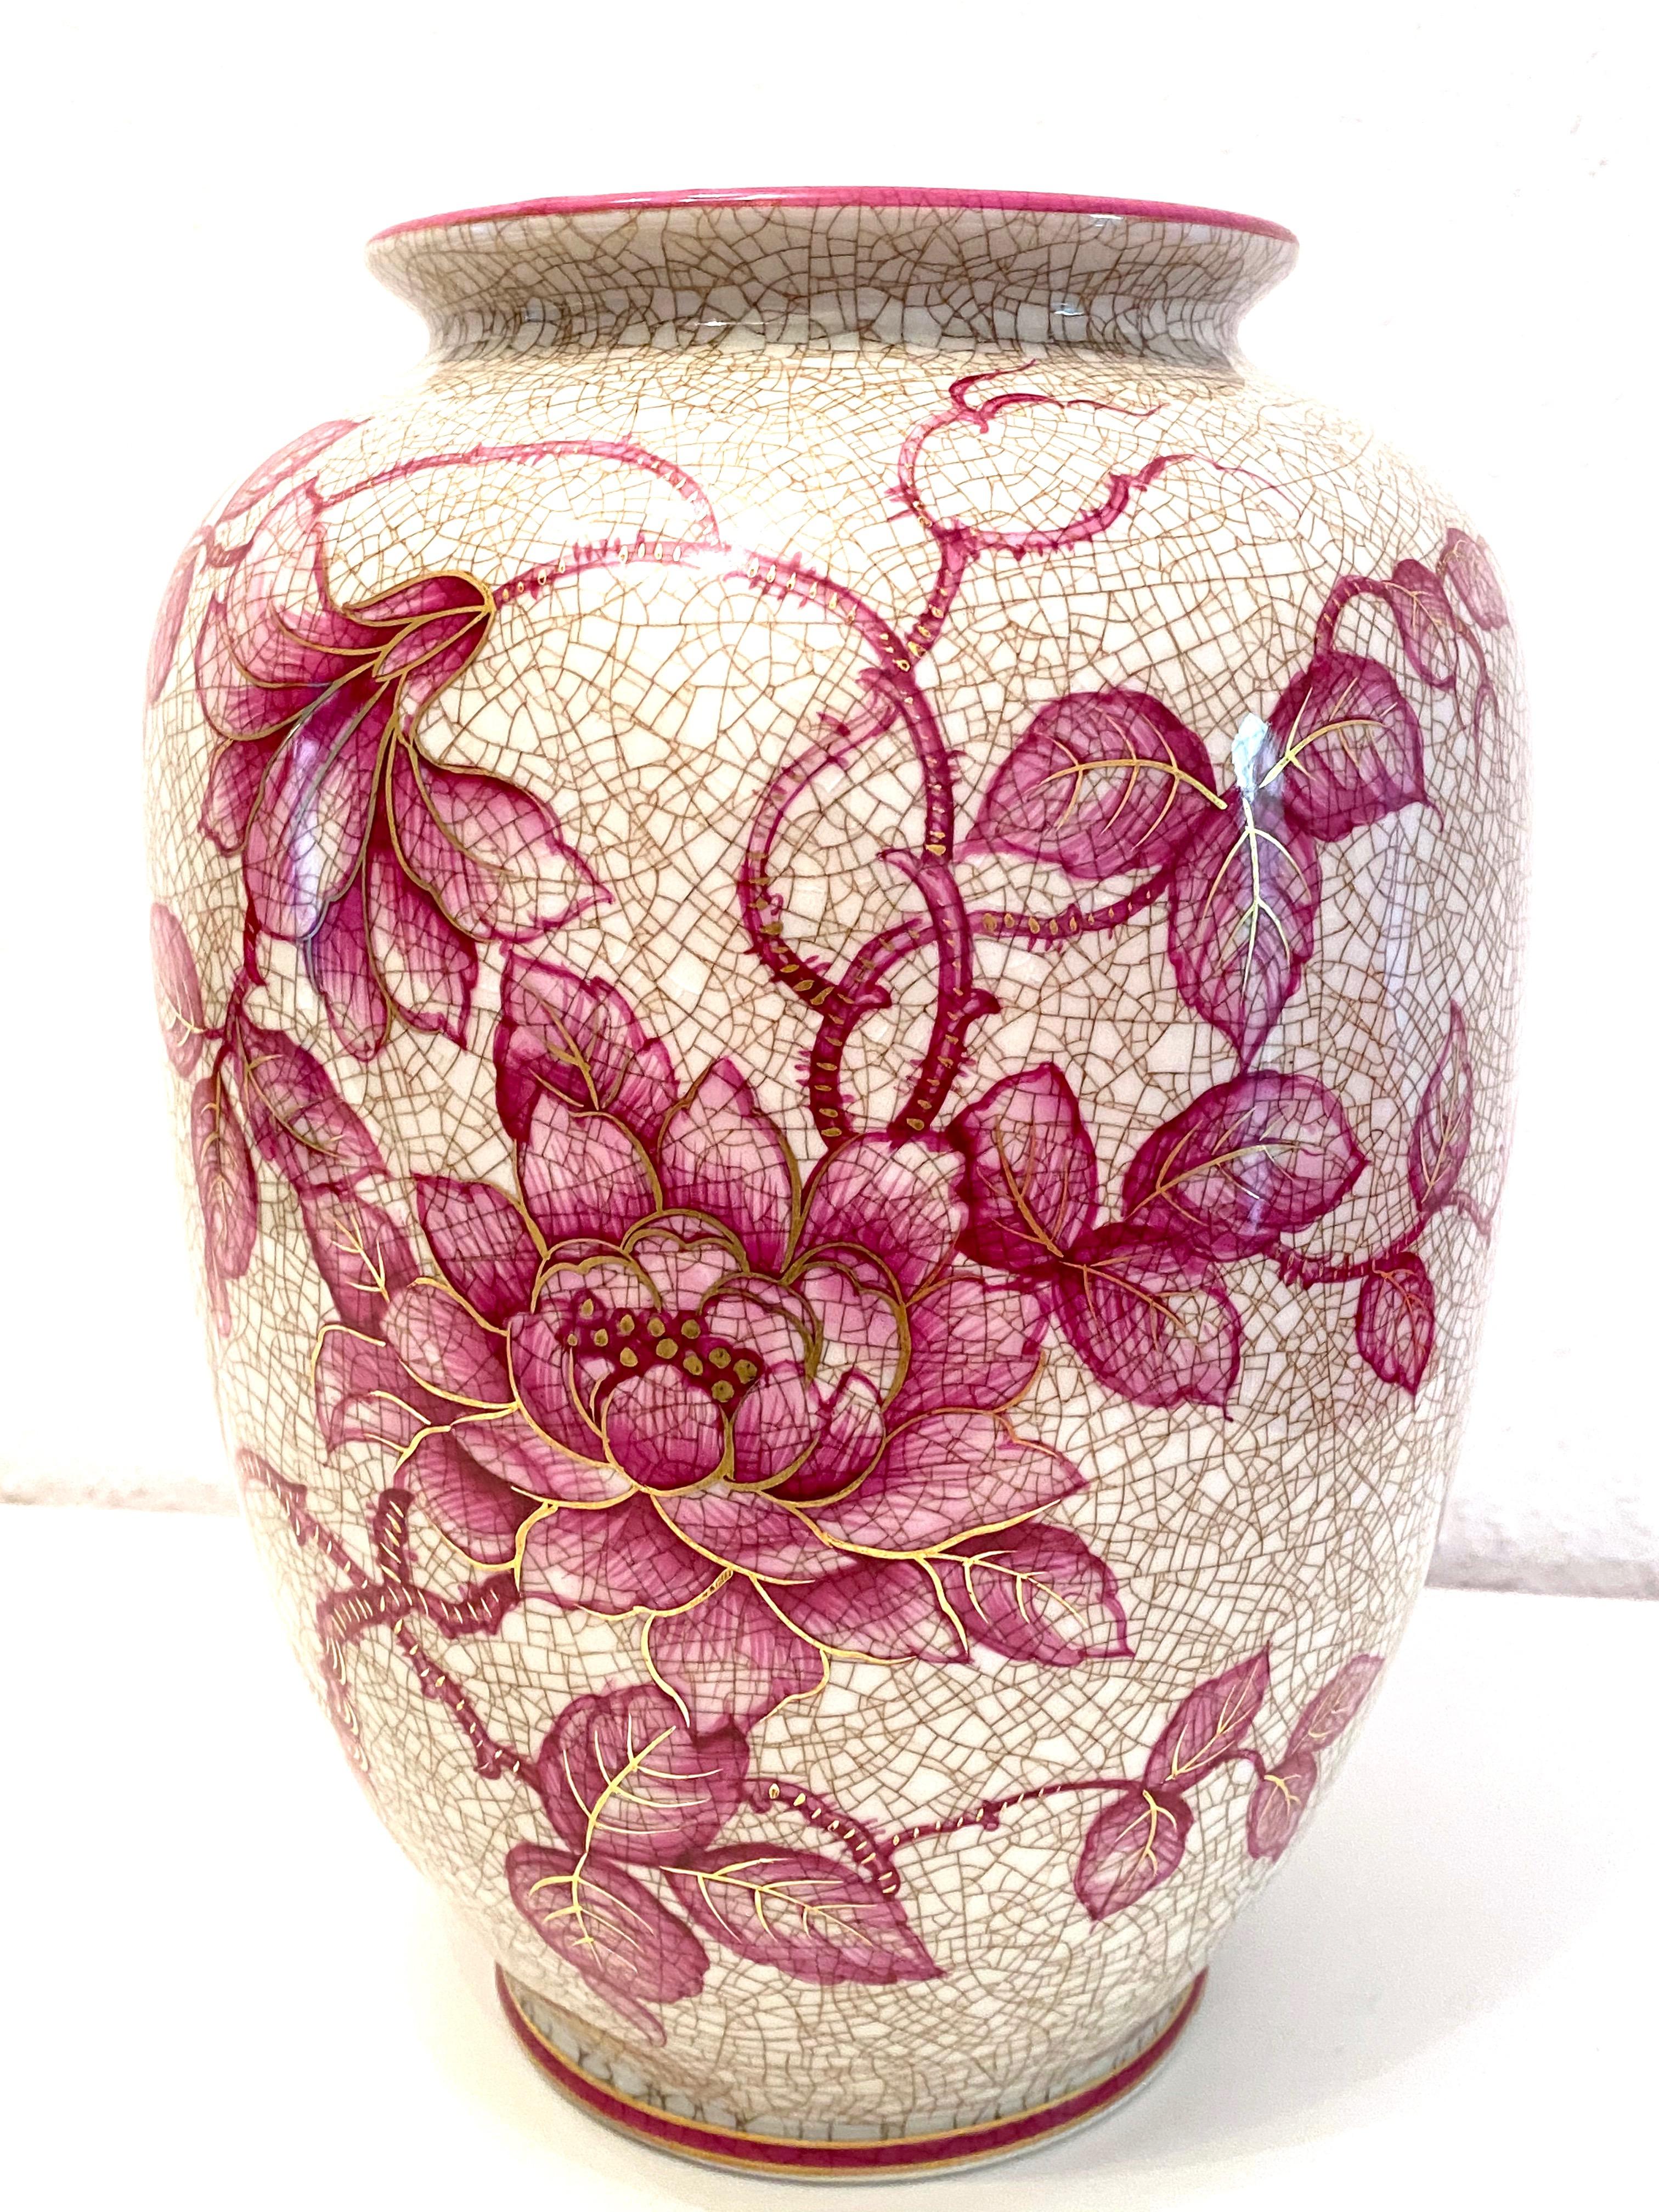 Mid-20th Century Pink Floral Ceramic Vase by Schaubach, Germany, 1930s